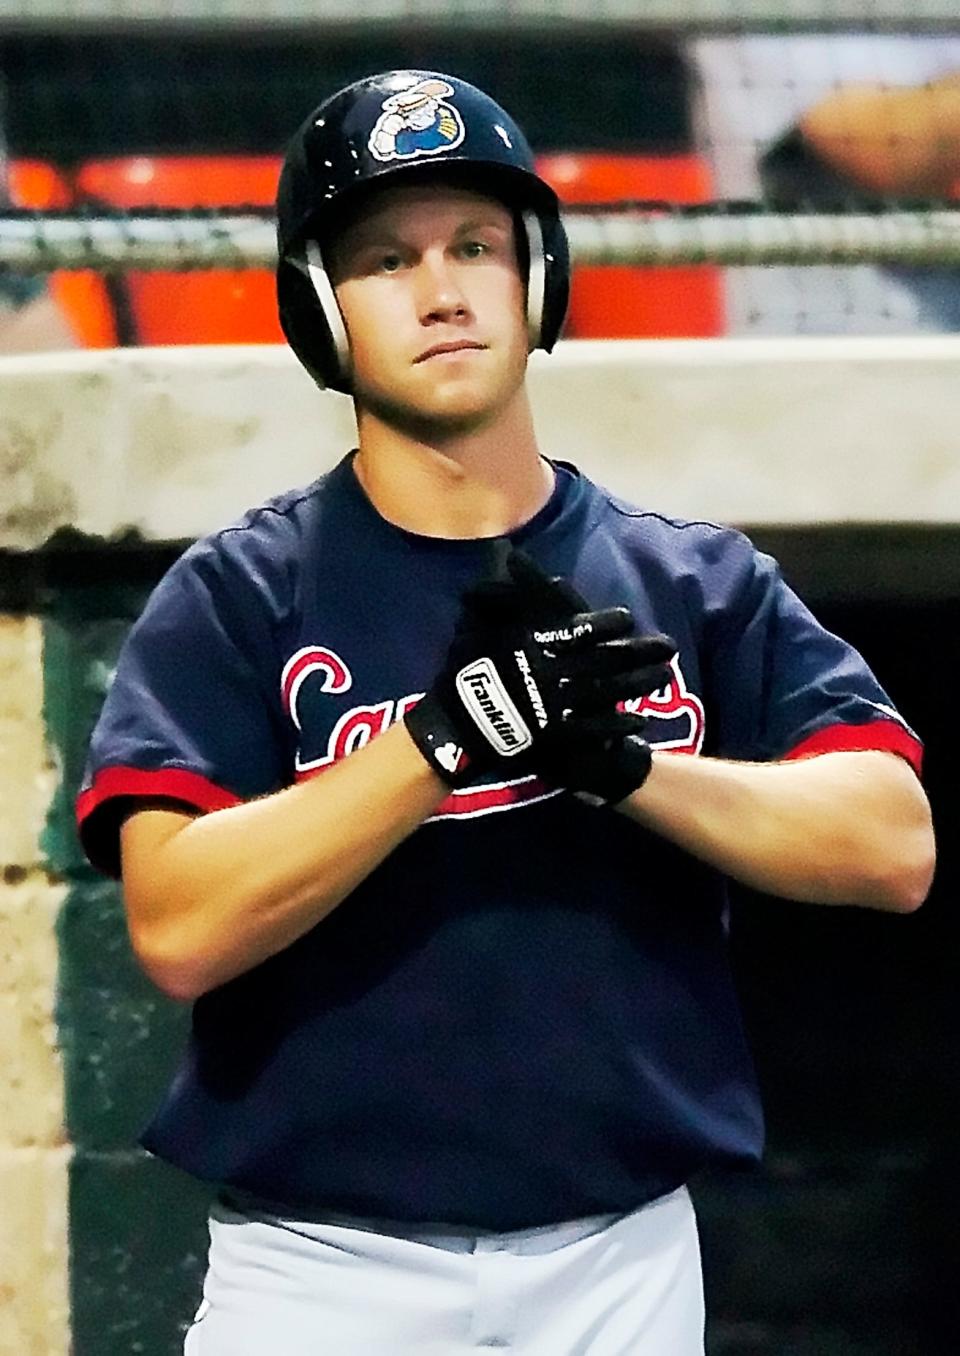 P.J. Hiser gets ready in the on-deck circle for the Lake County Captains during a game against the Hagerstown Suns at Municipal Stadium in 2006.